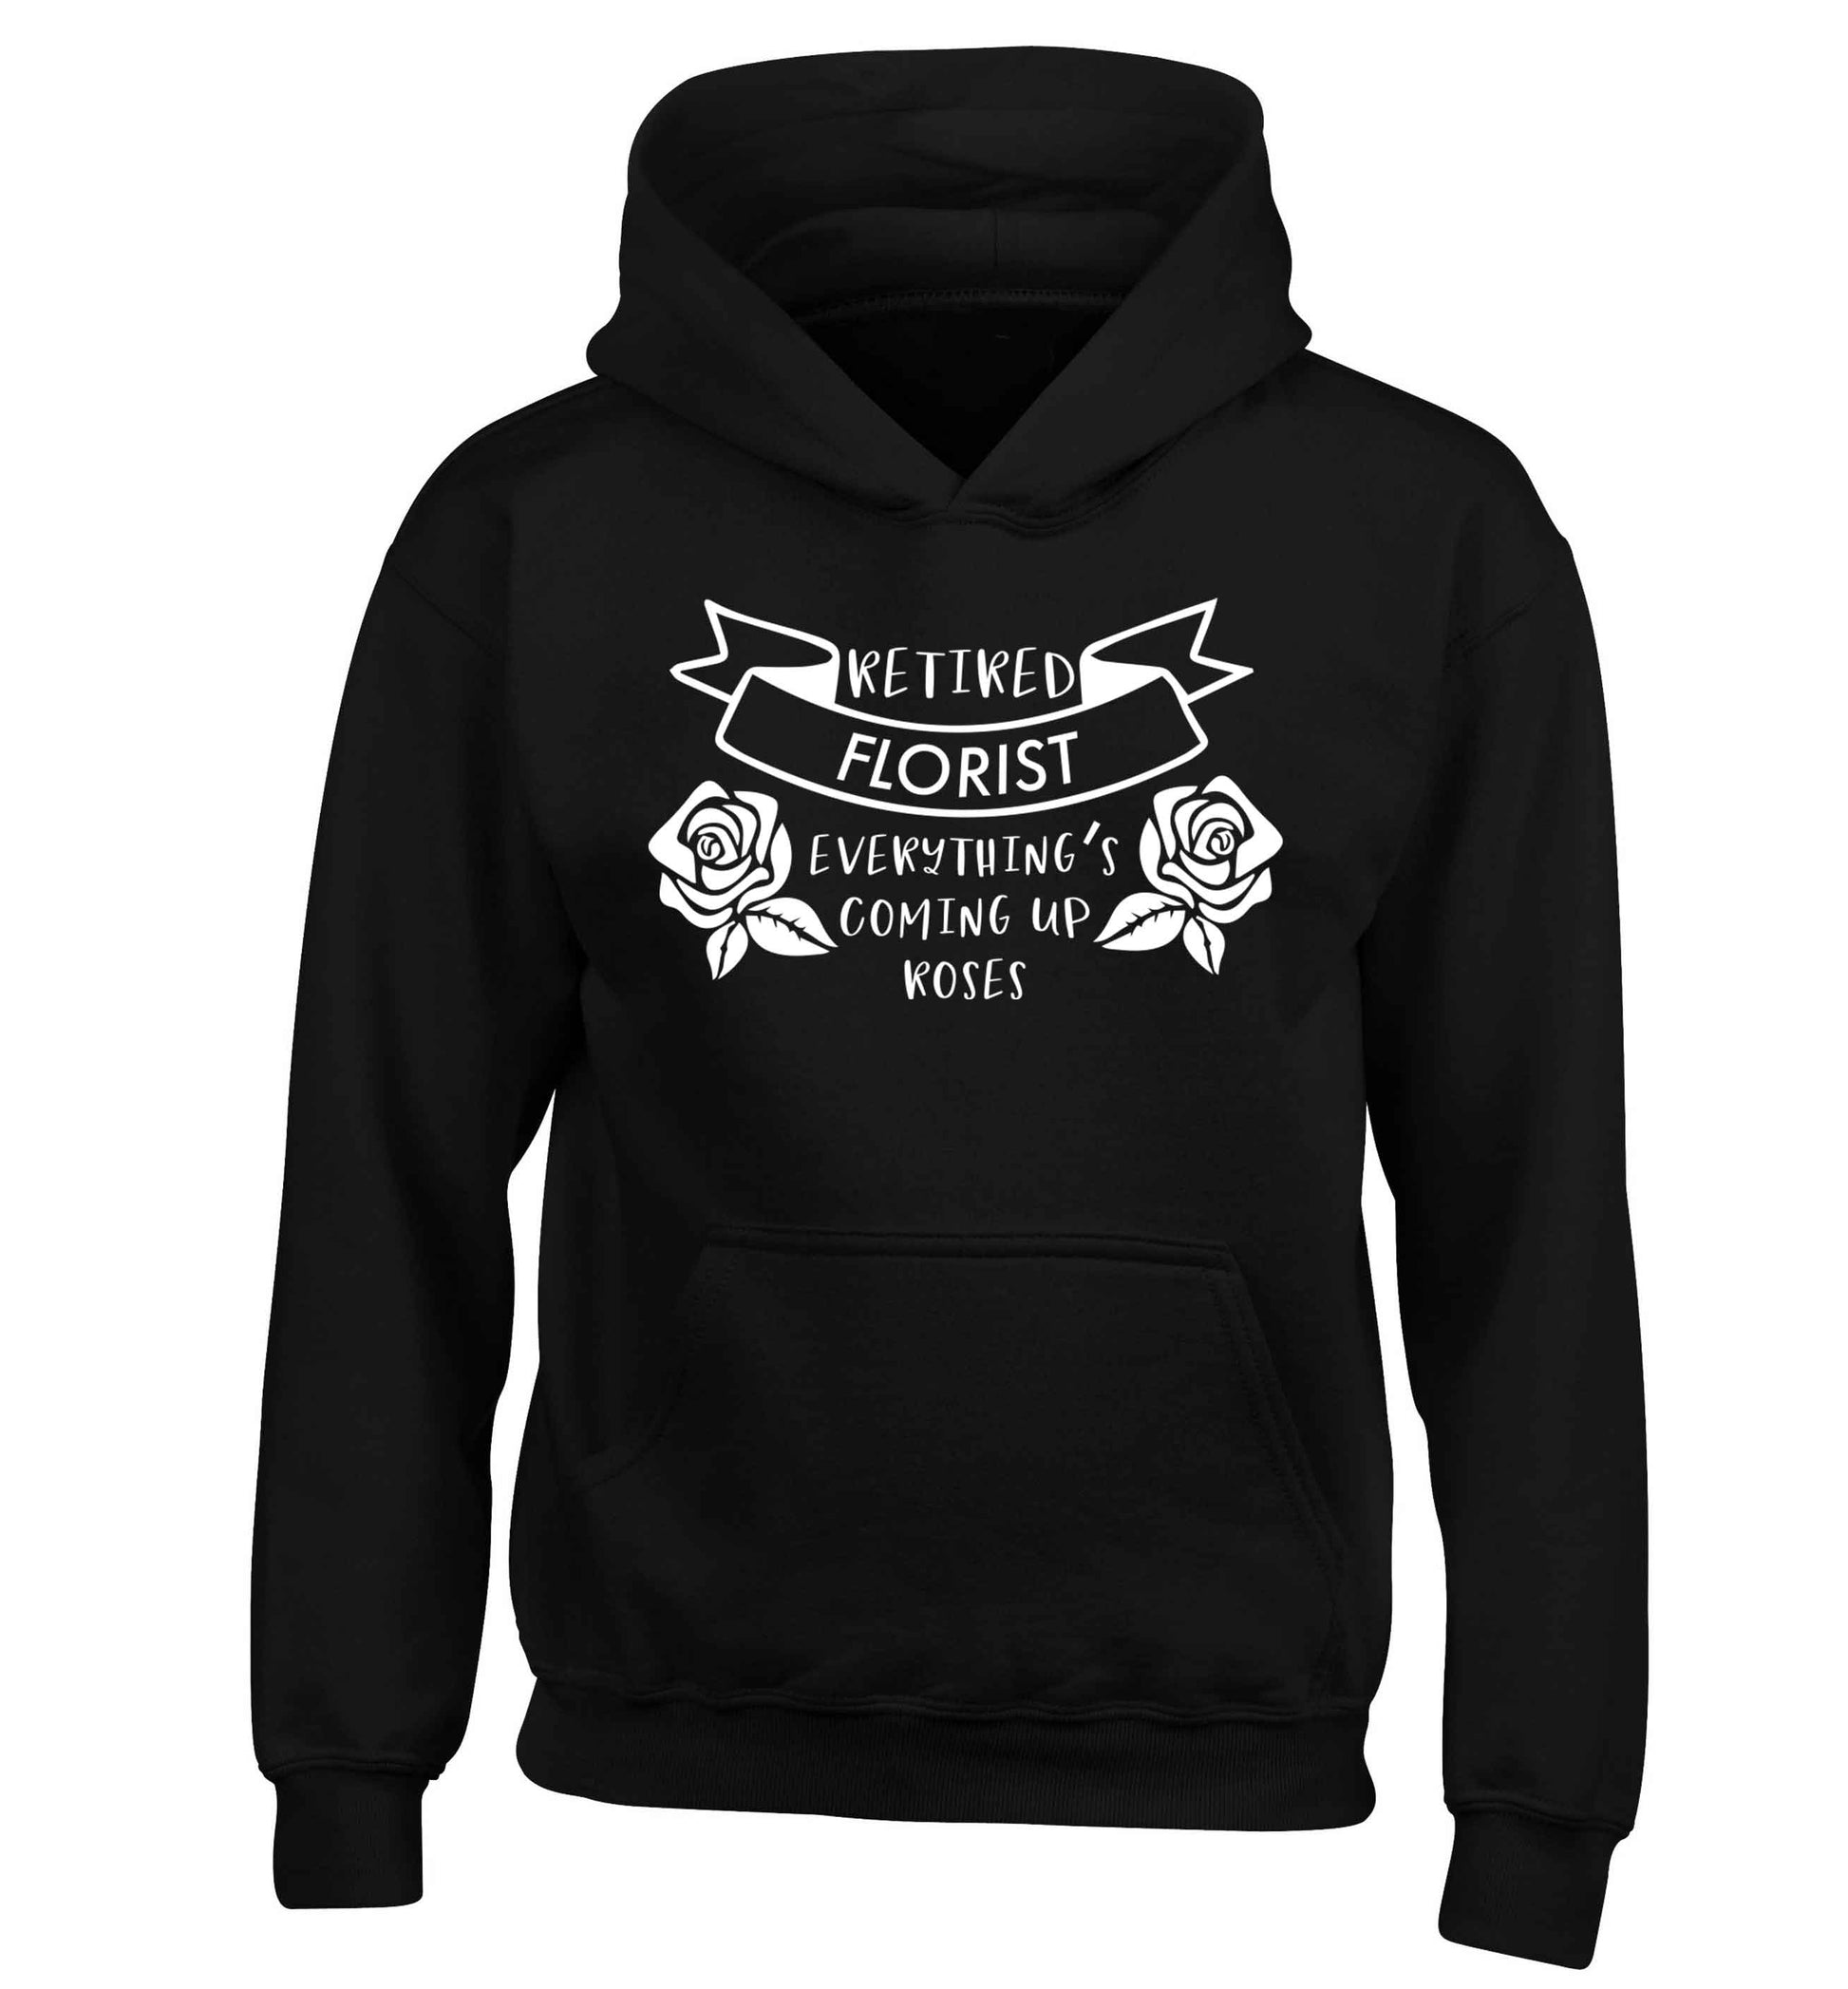 Retired florist everything's coming up roses children's black hoodie 12-13 Years